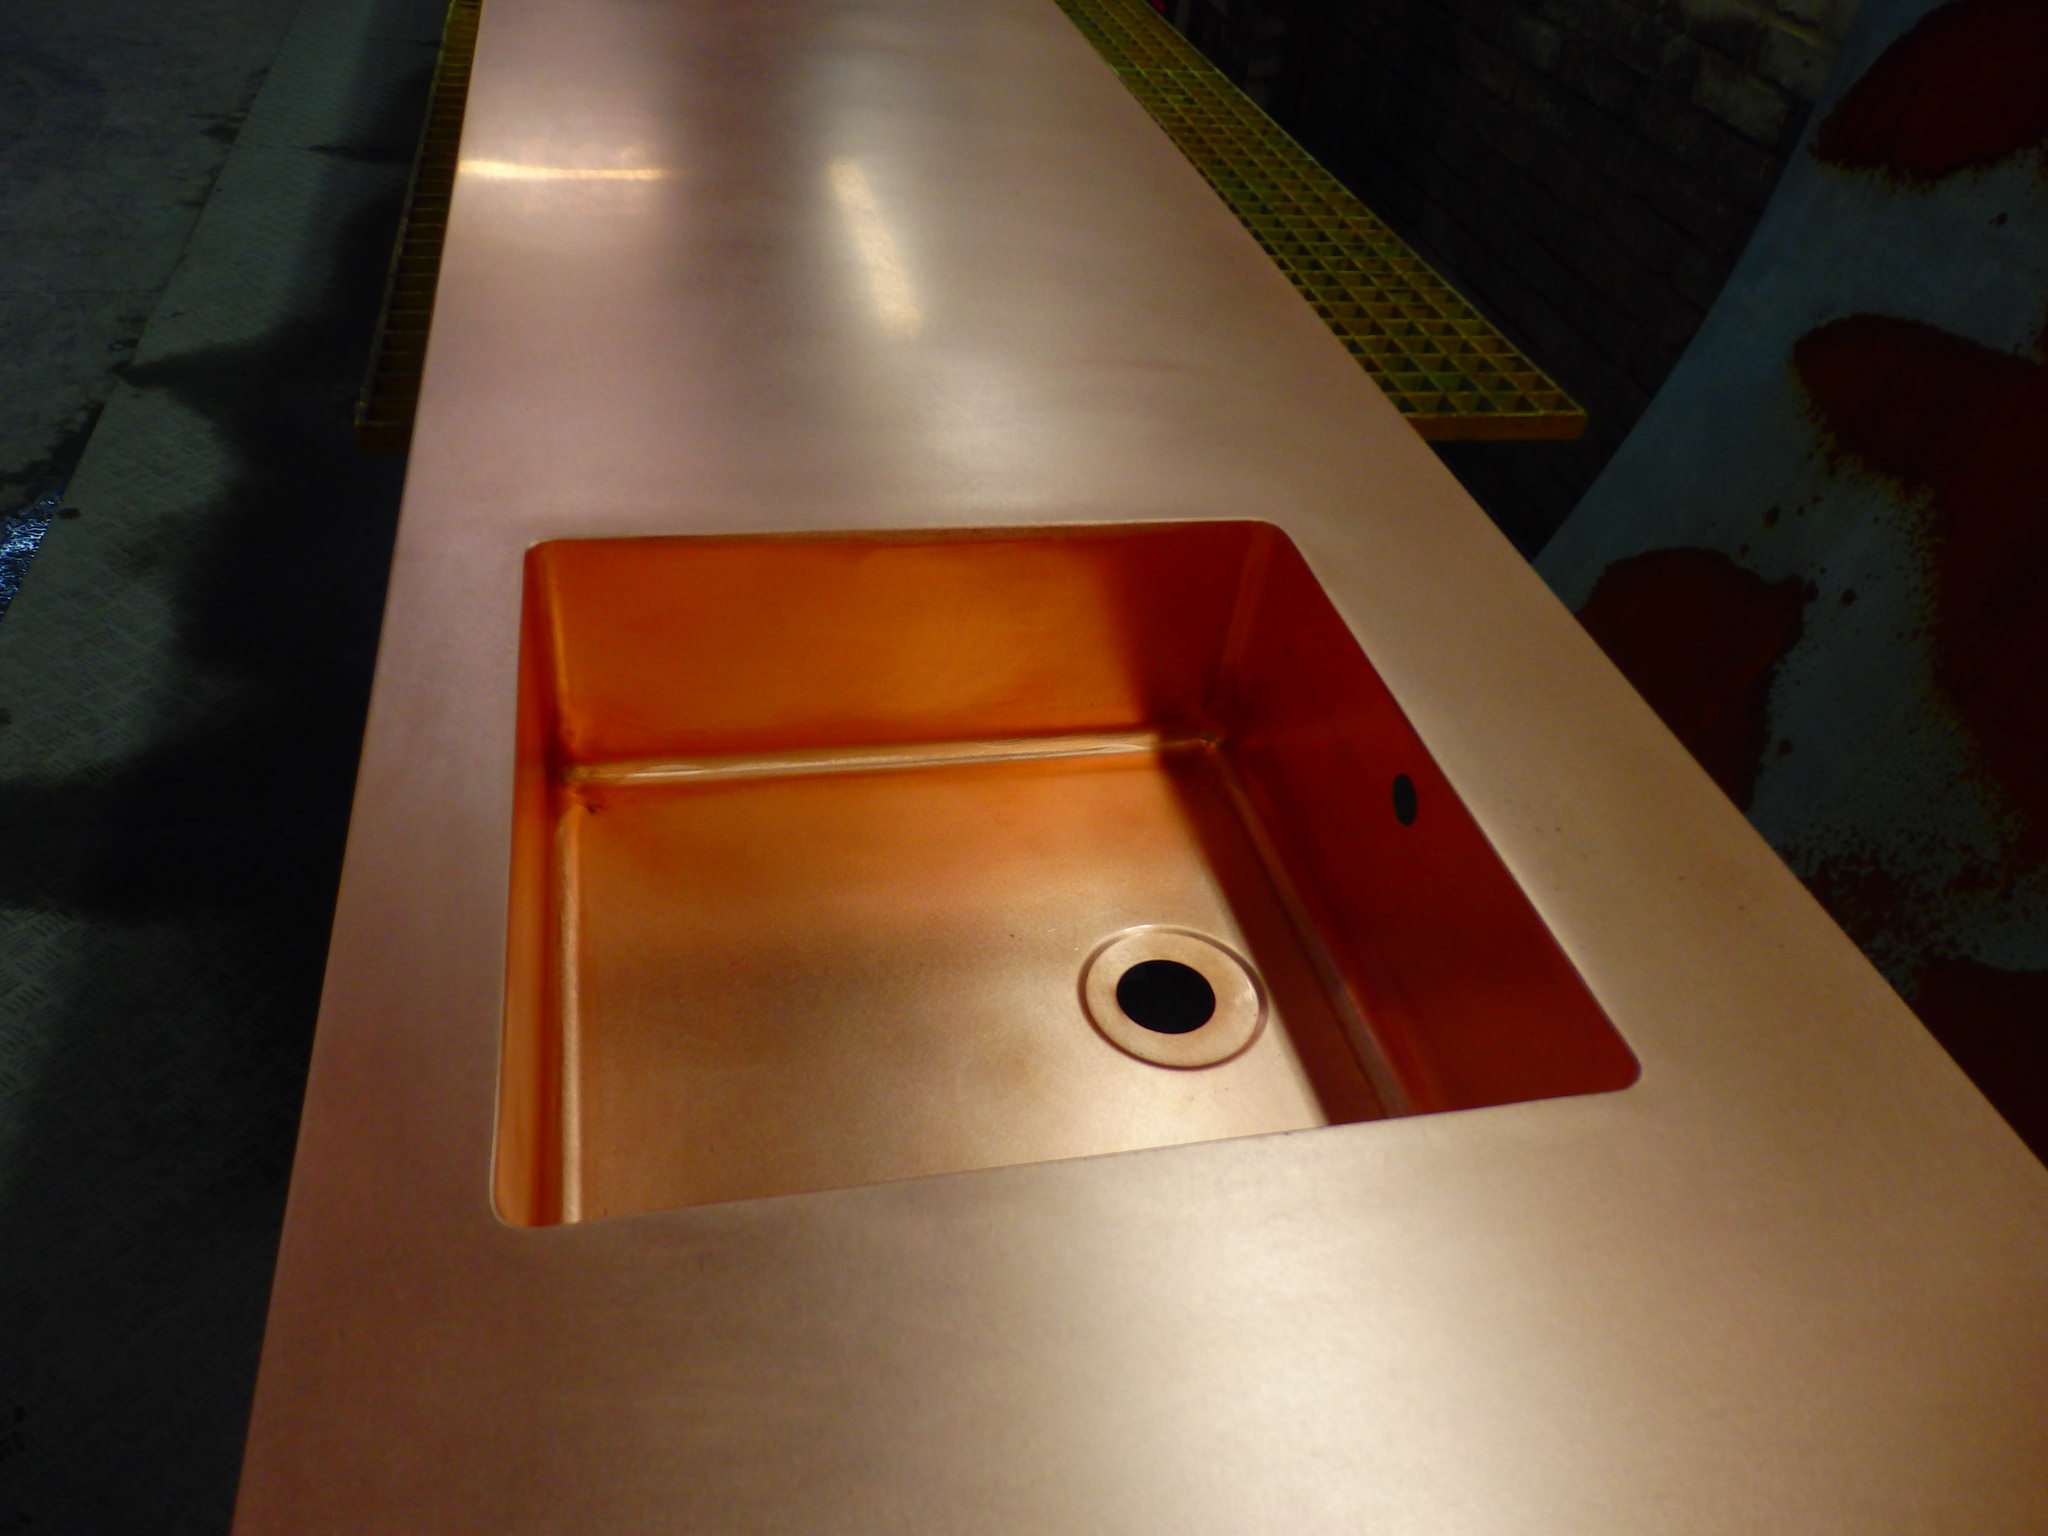 copper sink counter
antimicrobial copper